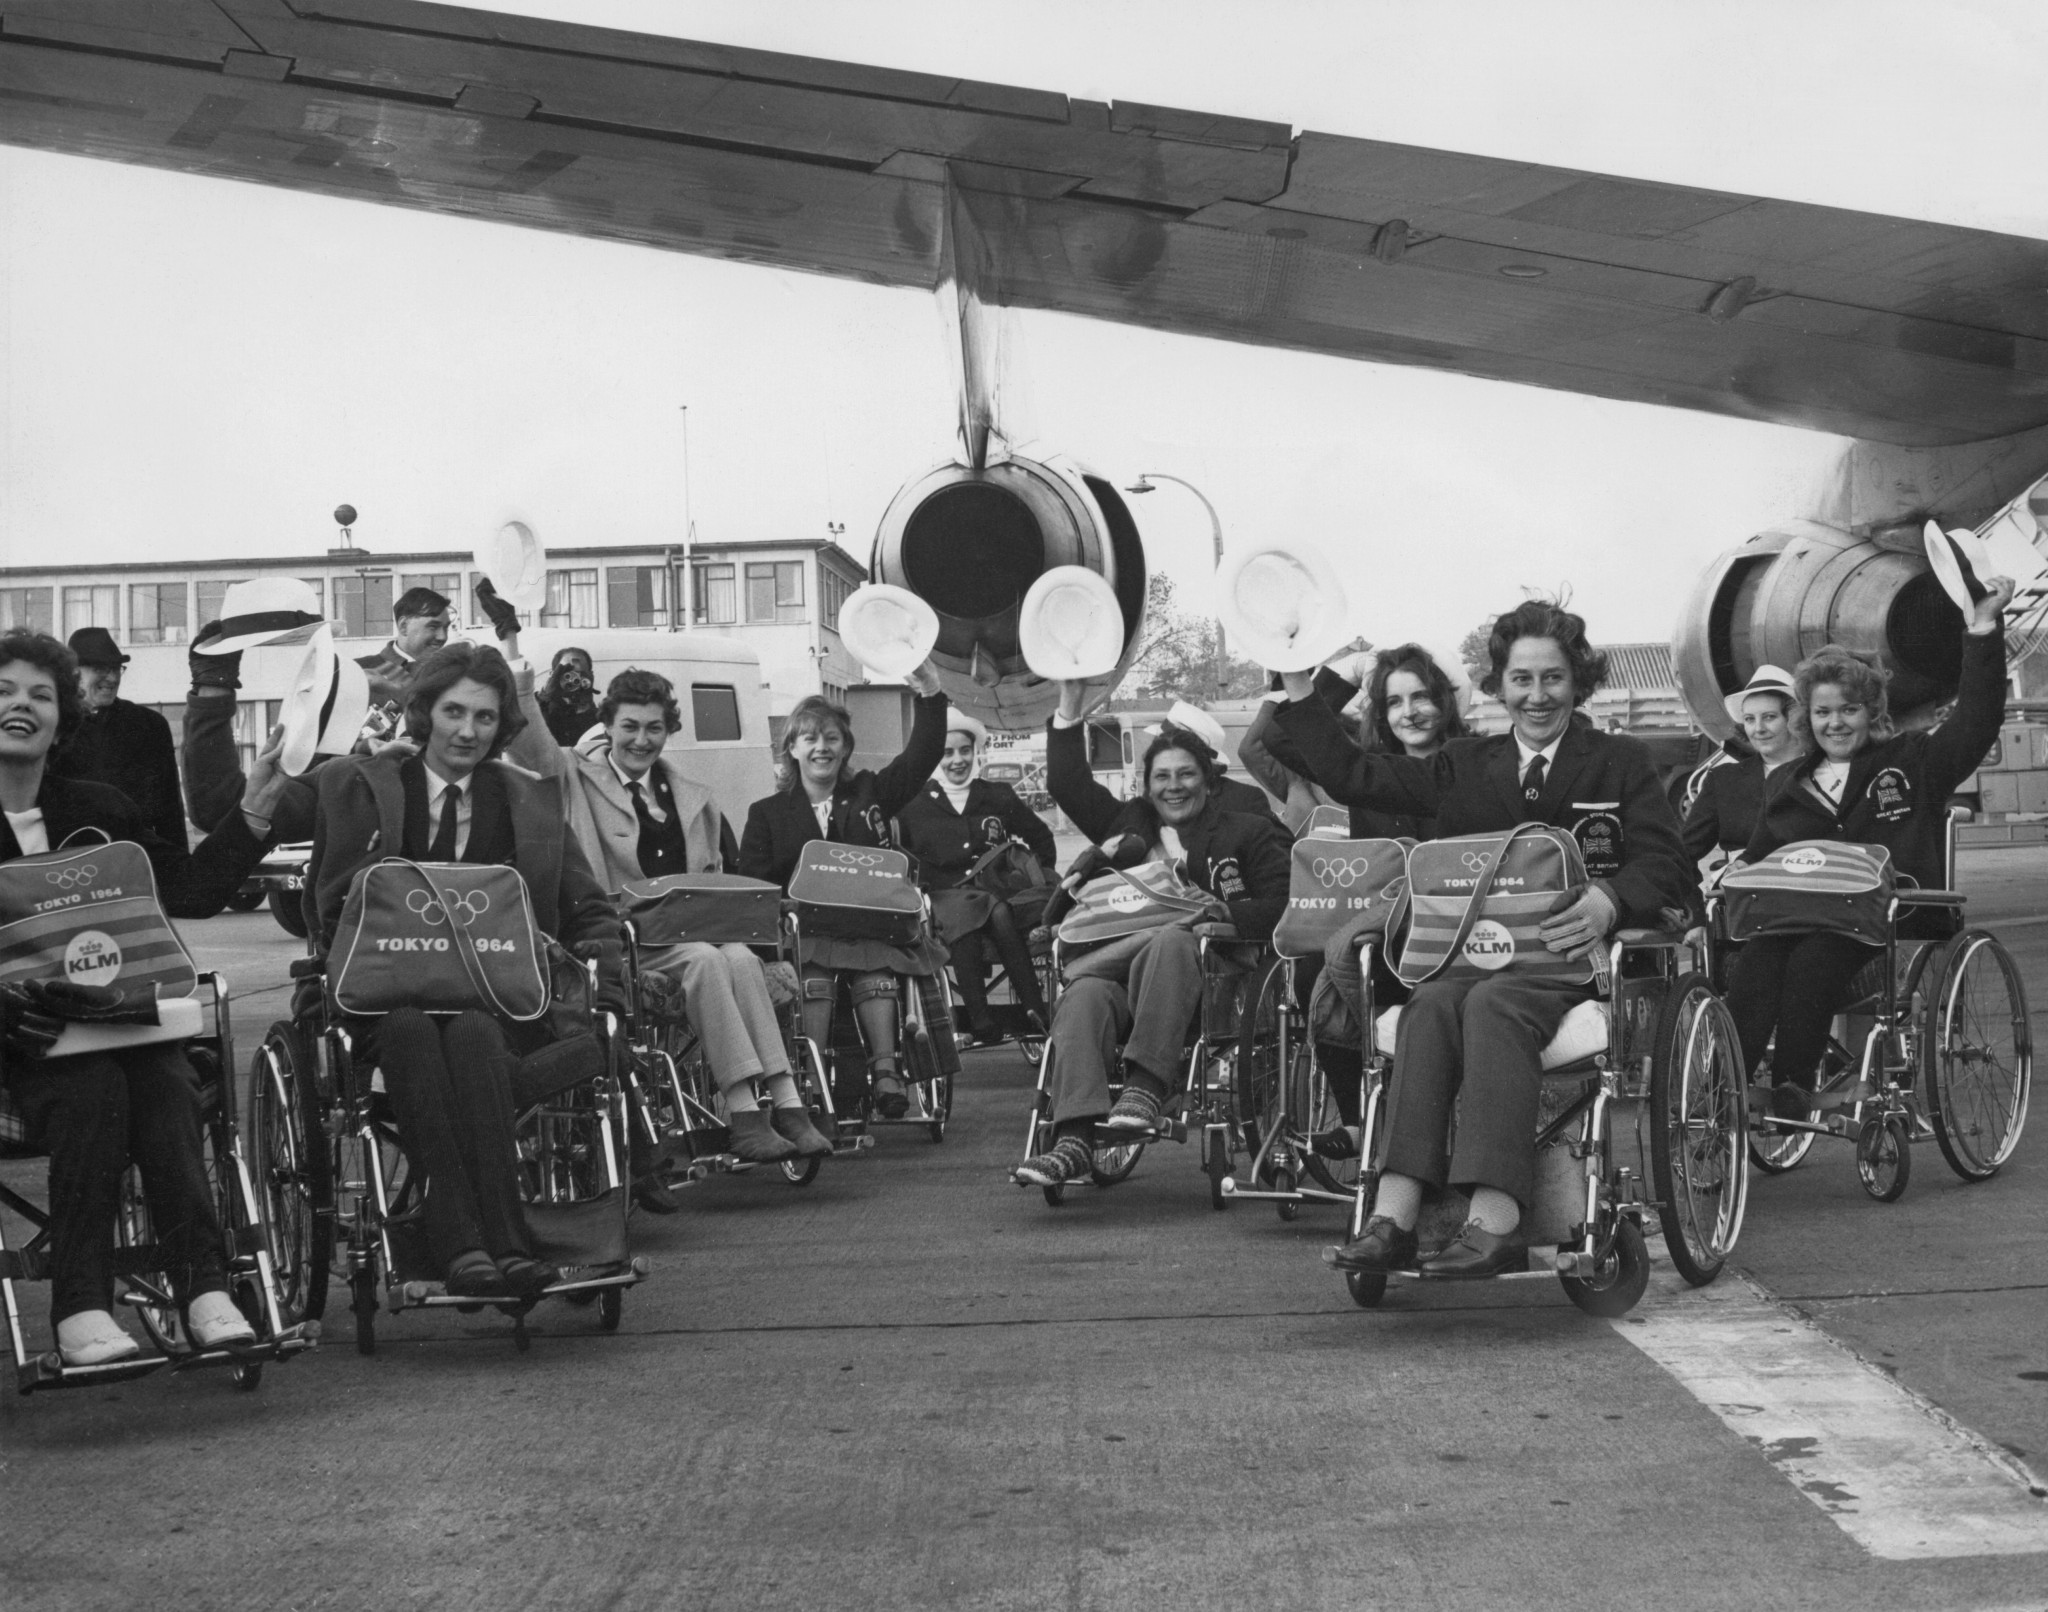 Most of the Tokyo 1964 Paralympians were from Europe and travelled to Tokyo by two charter planes from KLM Royal Dutch Airlines and Air France ©Getty Images